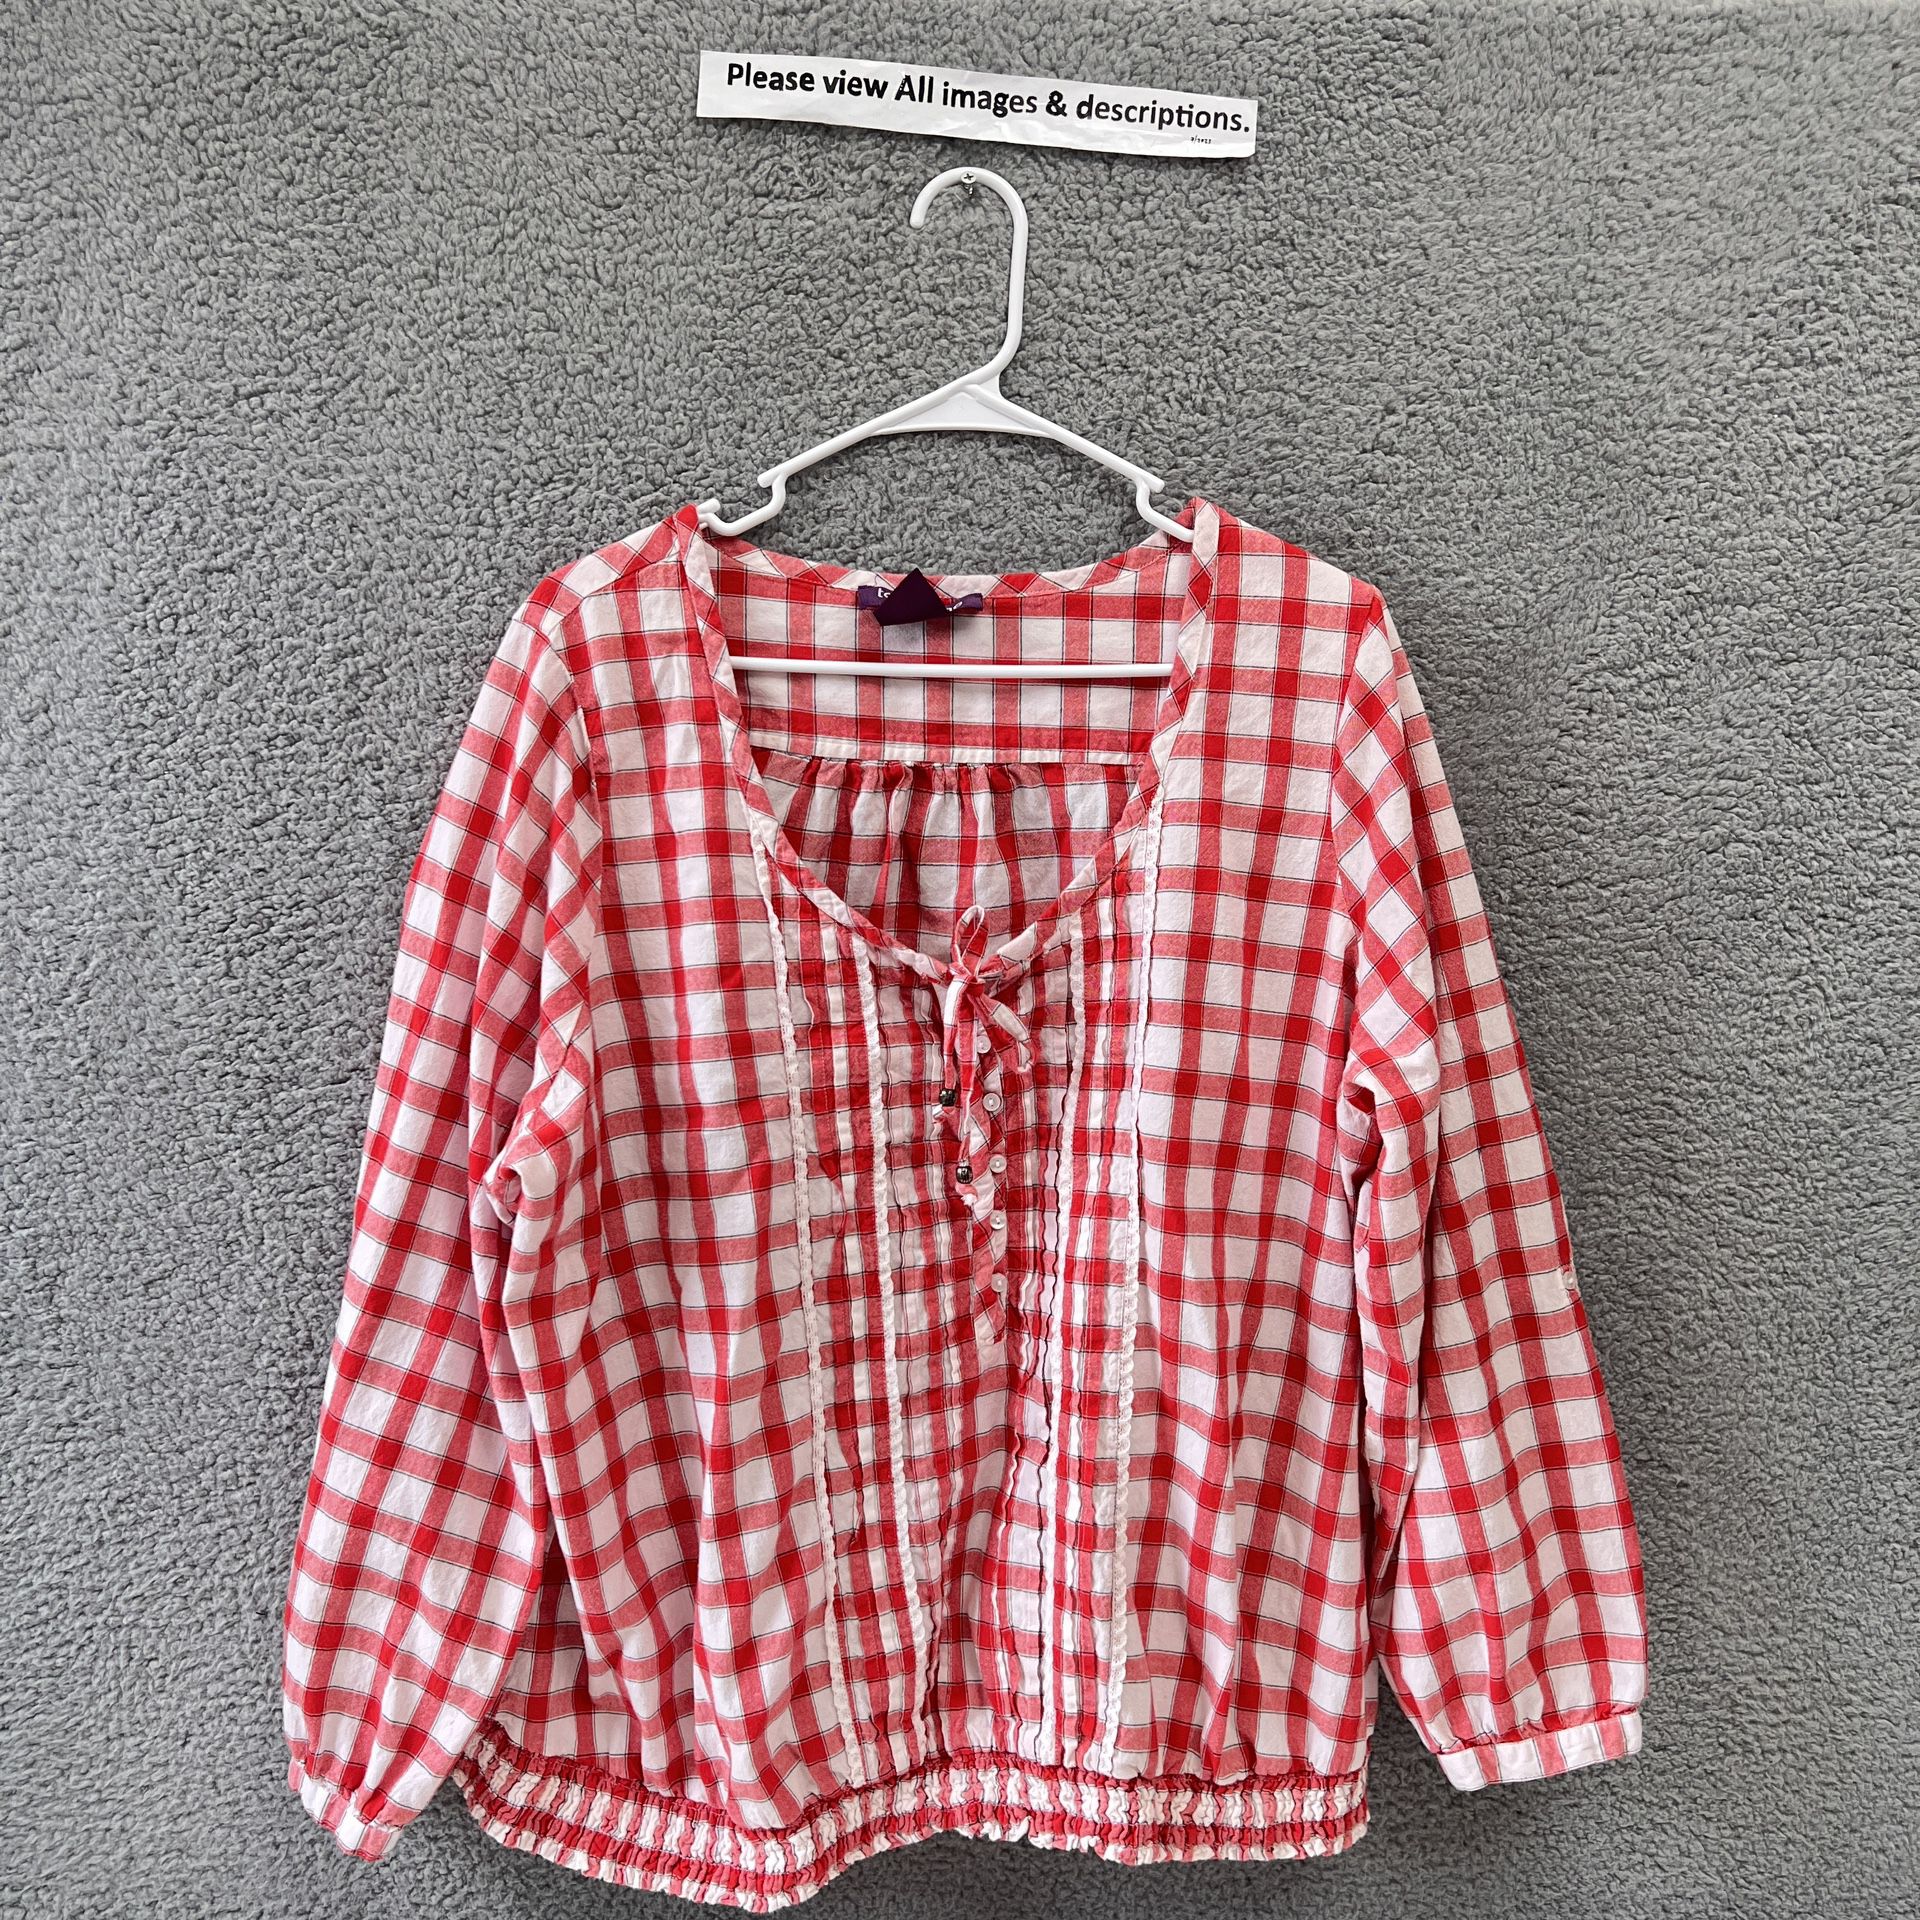 Taillissme Gingham Plaid Blouse Women's Top Plus size 20W Red white cute Bow 